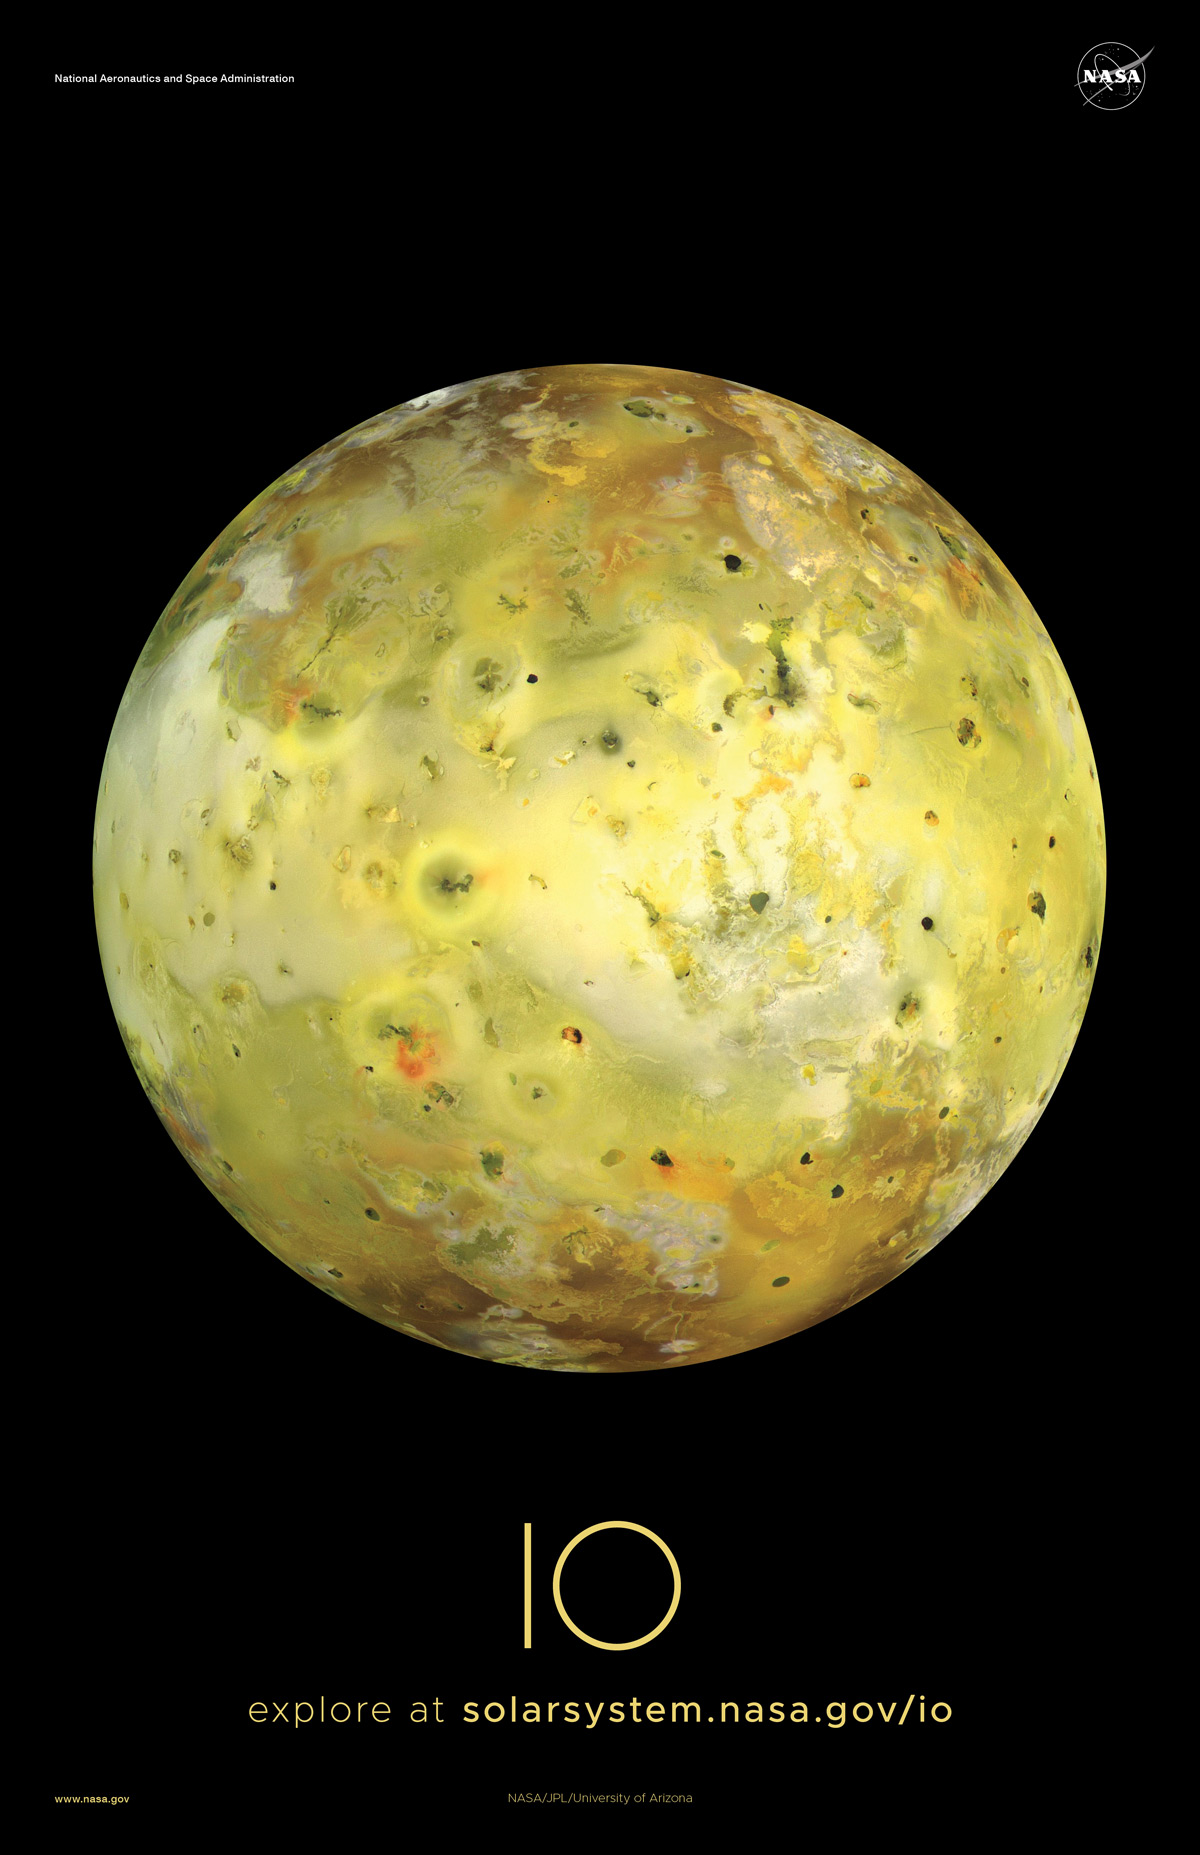 Full disk view of Io with many volcanoes visible.